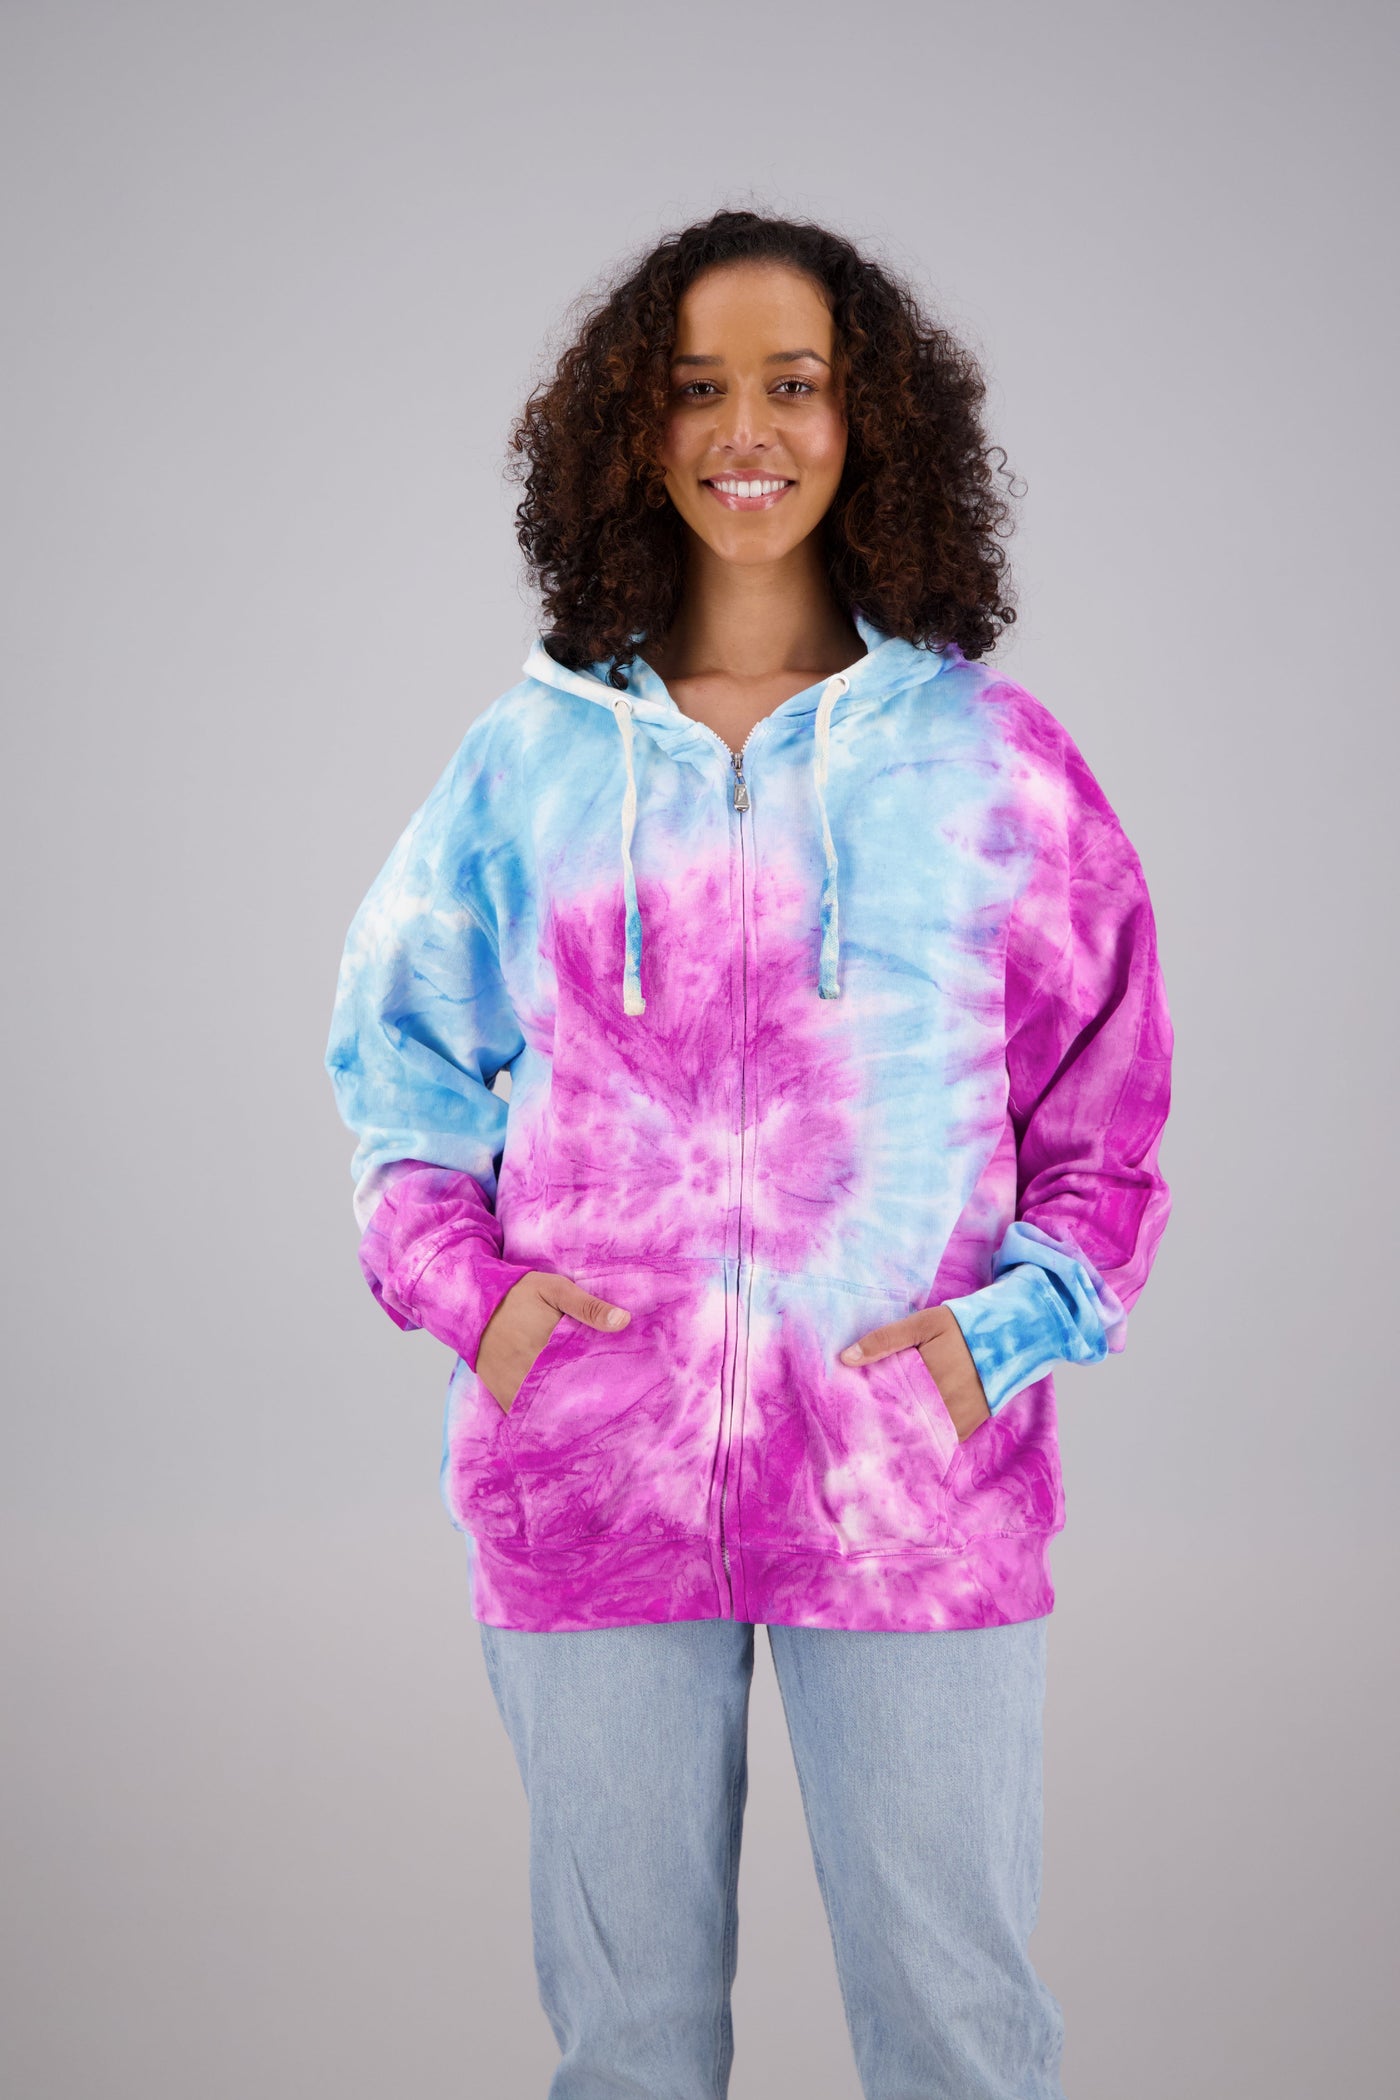 Adult's Tie-Dye Zip-Up Hoodie (2-XL) Cotton/Polyester Blend 9656